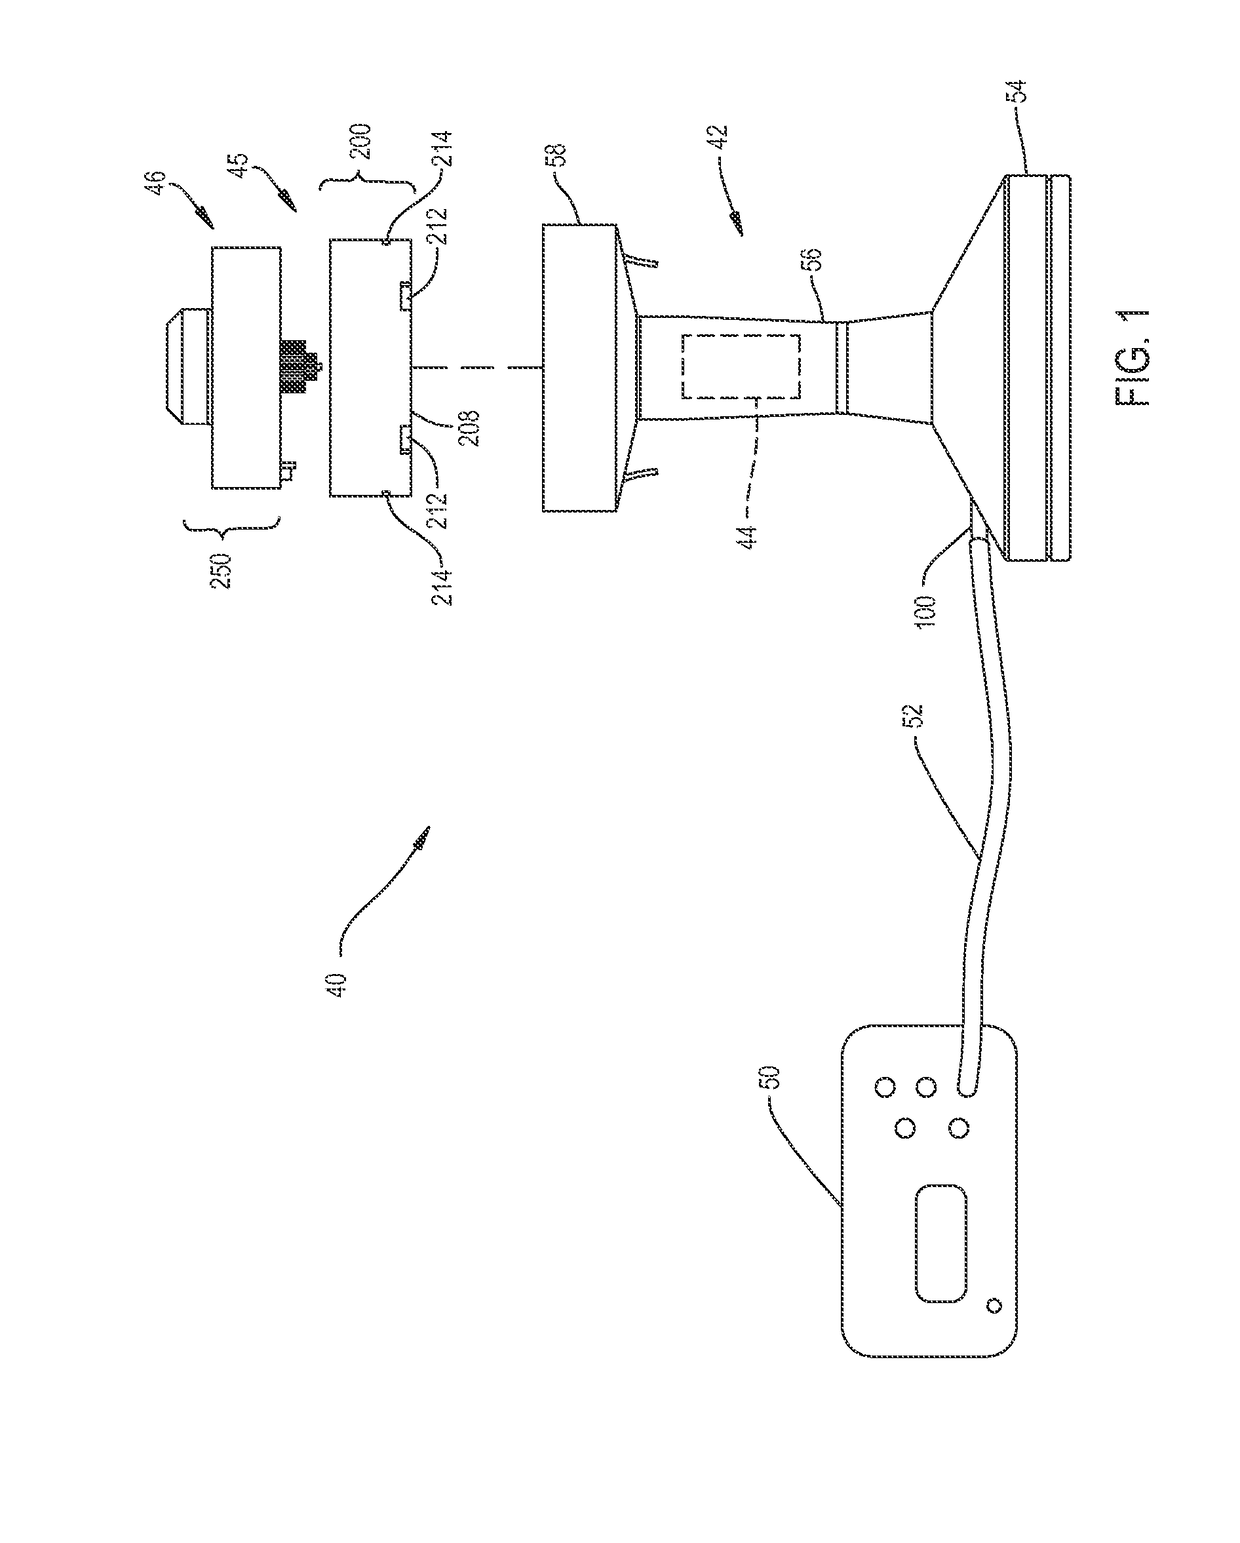 Bone cleaning assembly with a rotating cutting flute that is surrounded by a rotating shaving tube